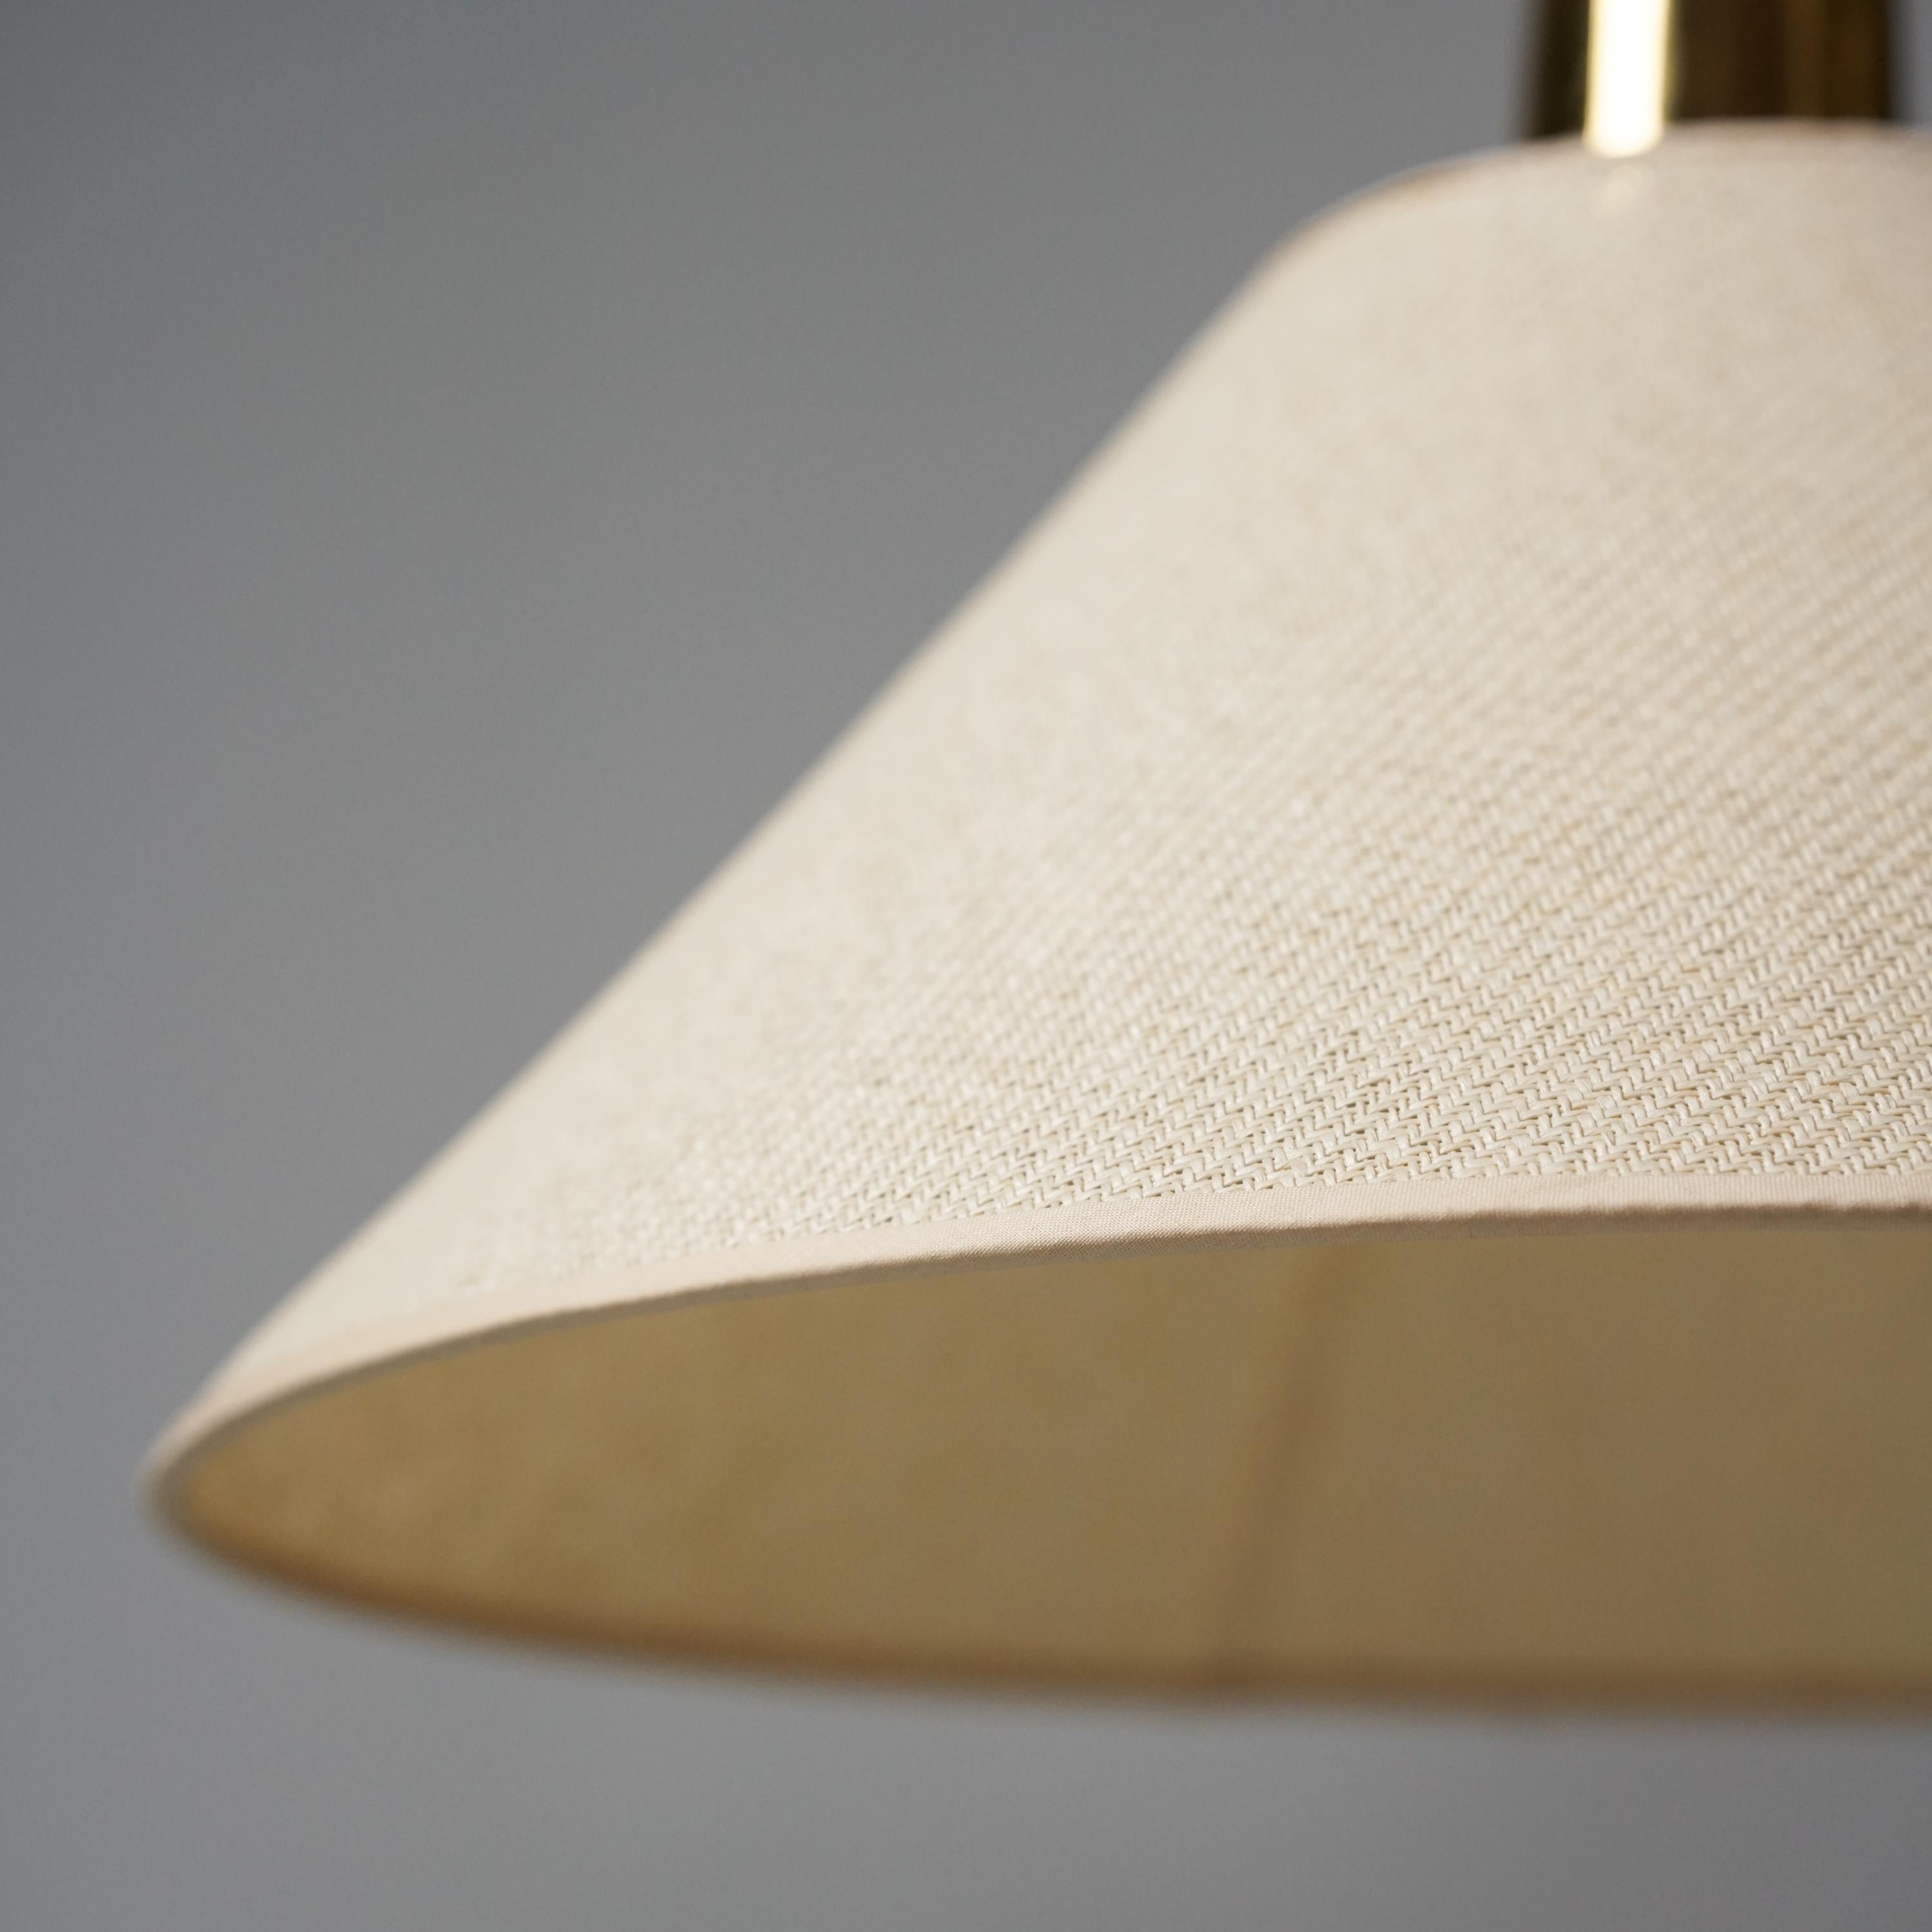 Mid-Century Modern Rare Pendant by Lisa Johansson-Pape for Orno, 1950s For Sale